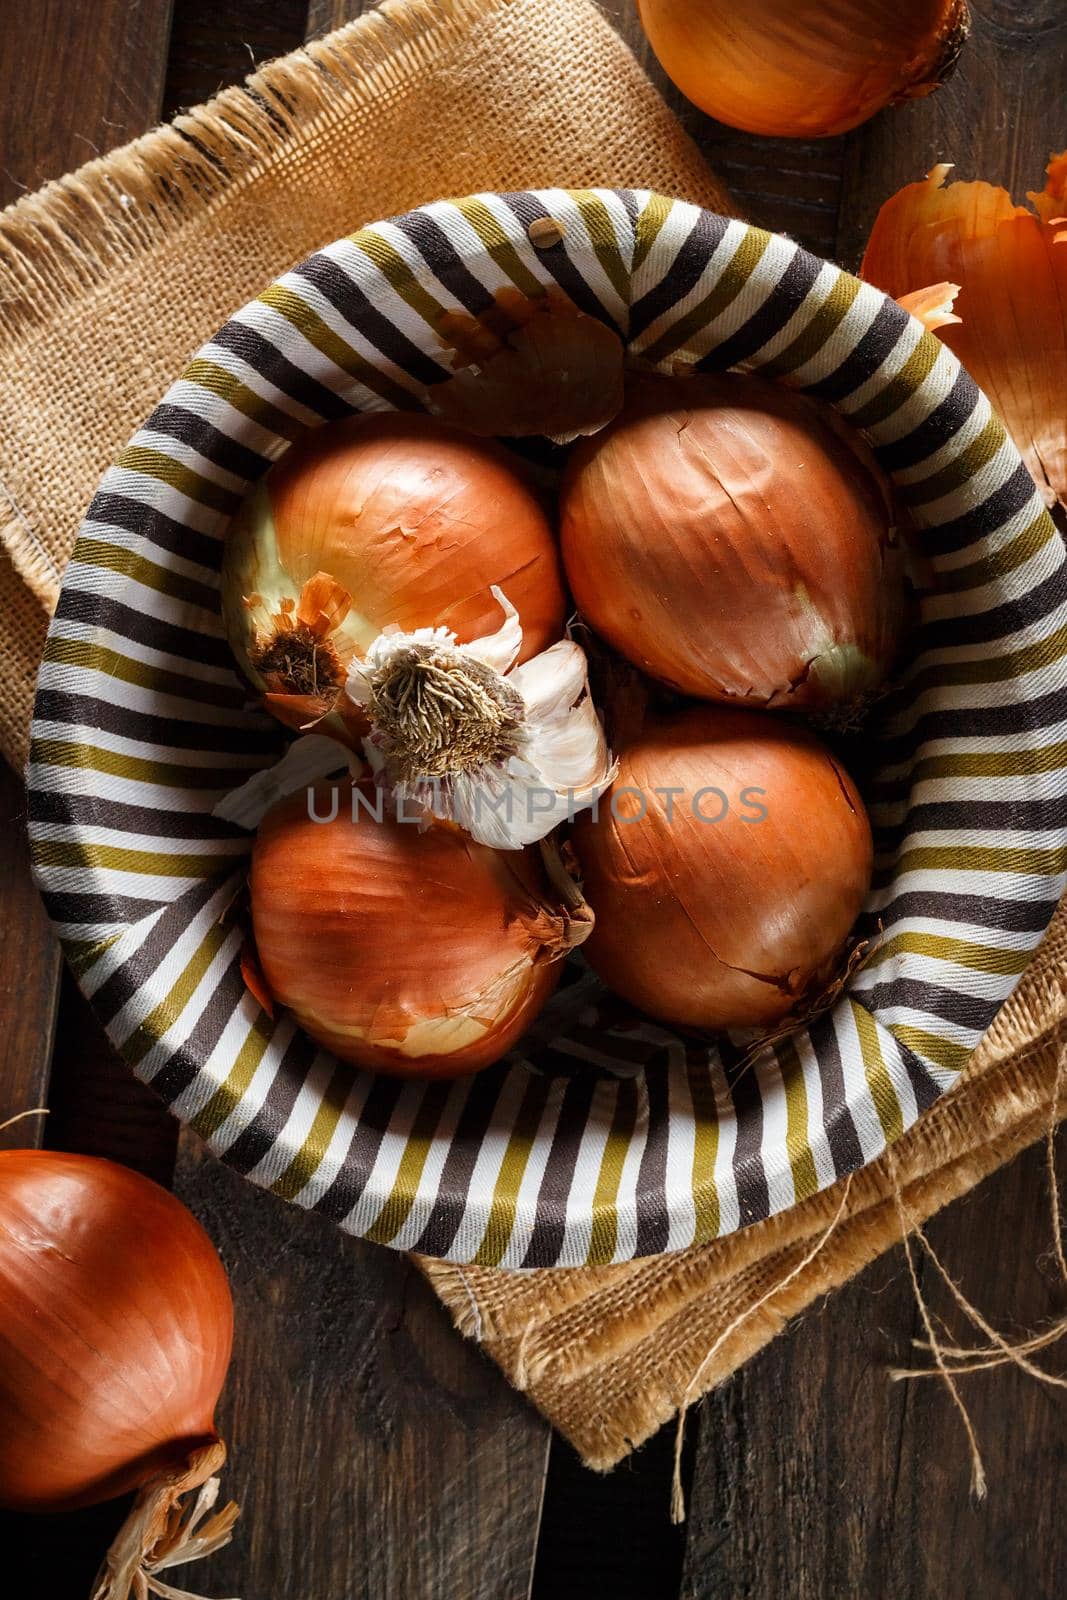 Still life of onions and garlic head in a wicker basket on a sackcloth and wooden boards. Seen from above. Rustic style. Vertical image.